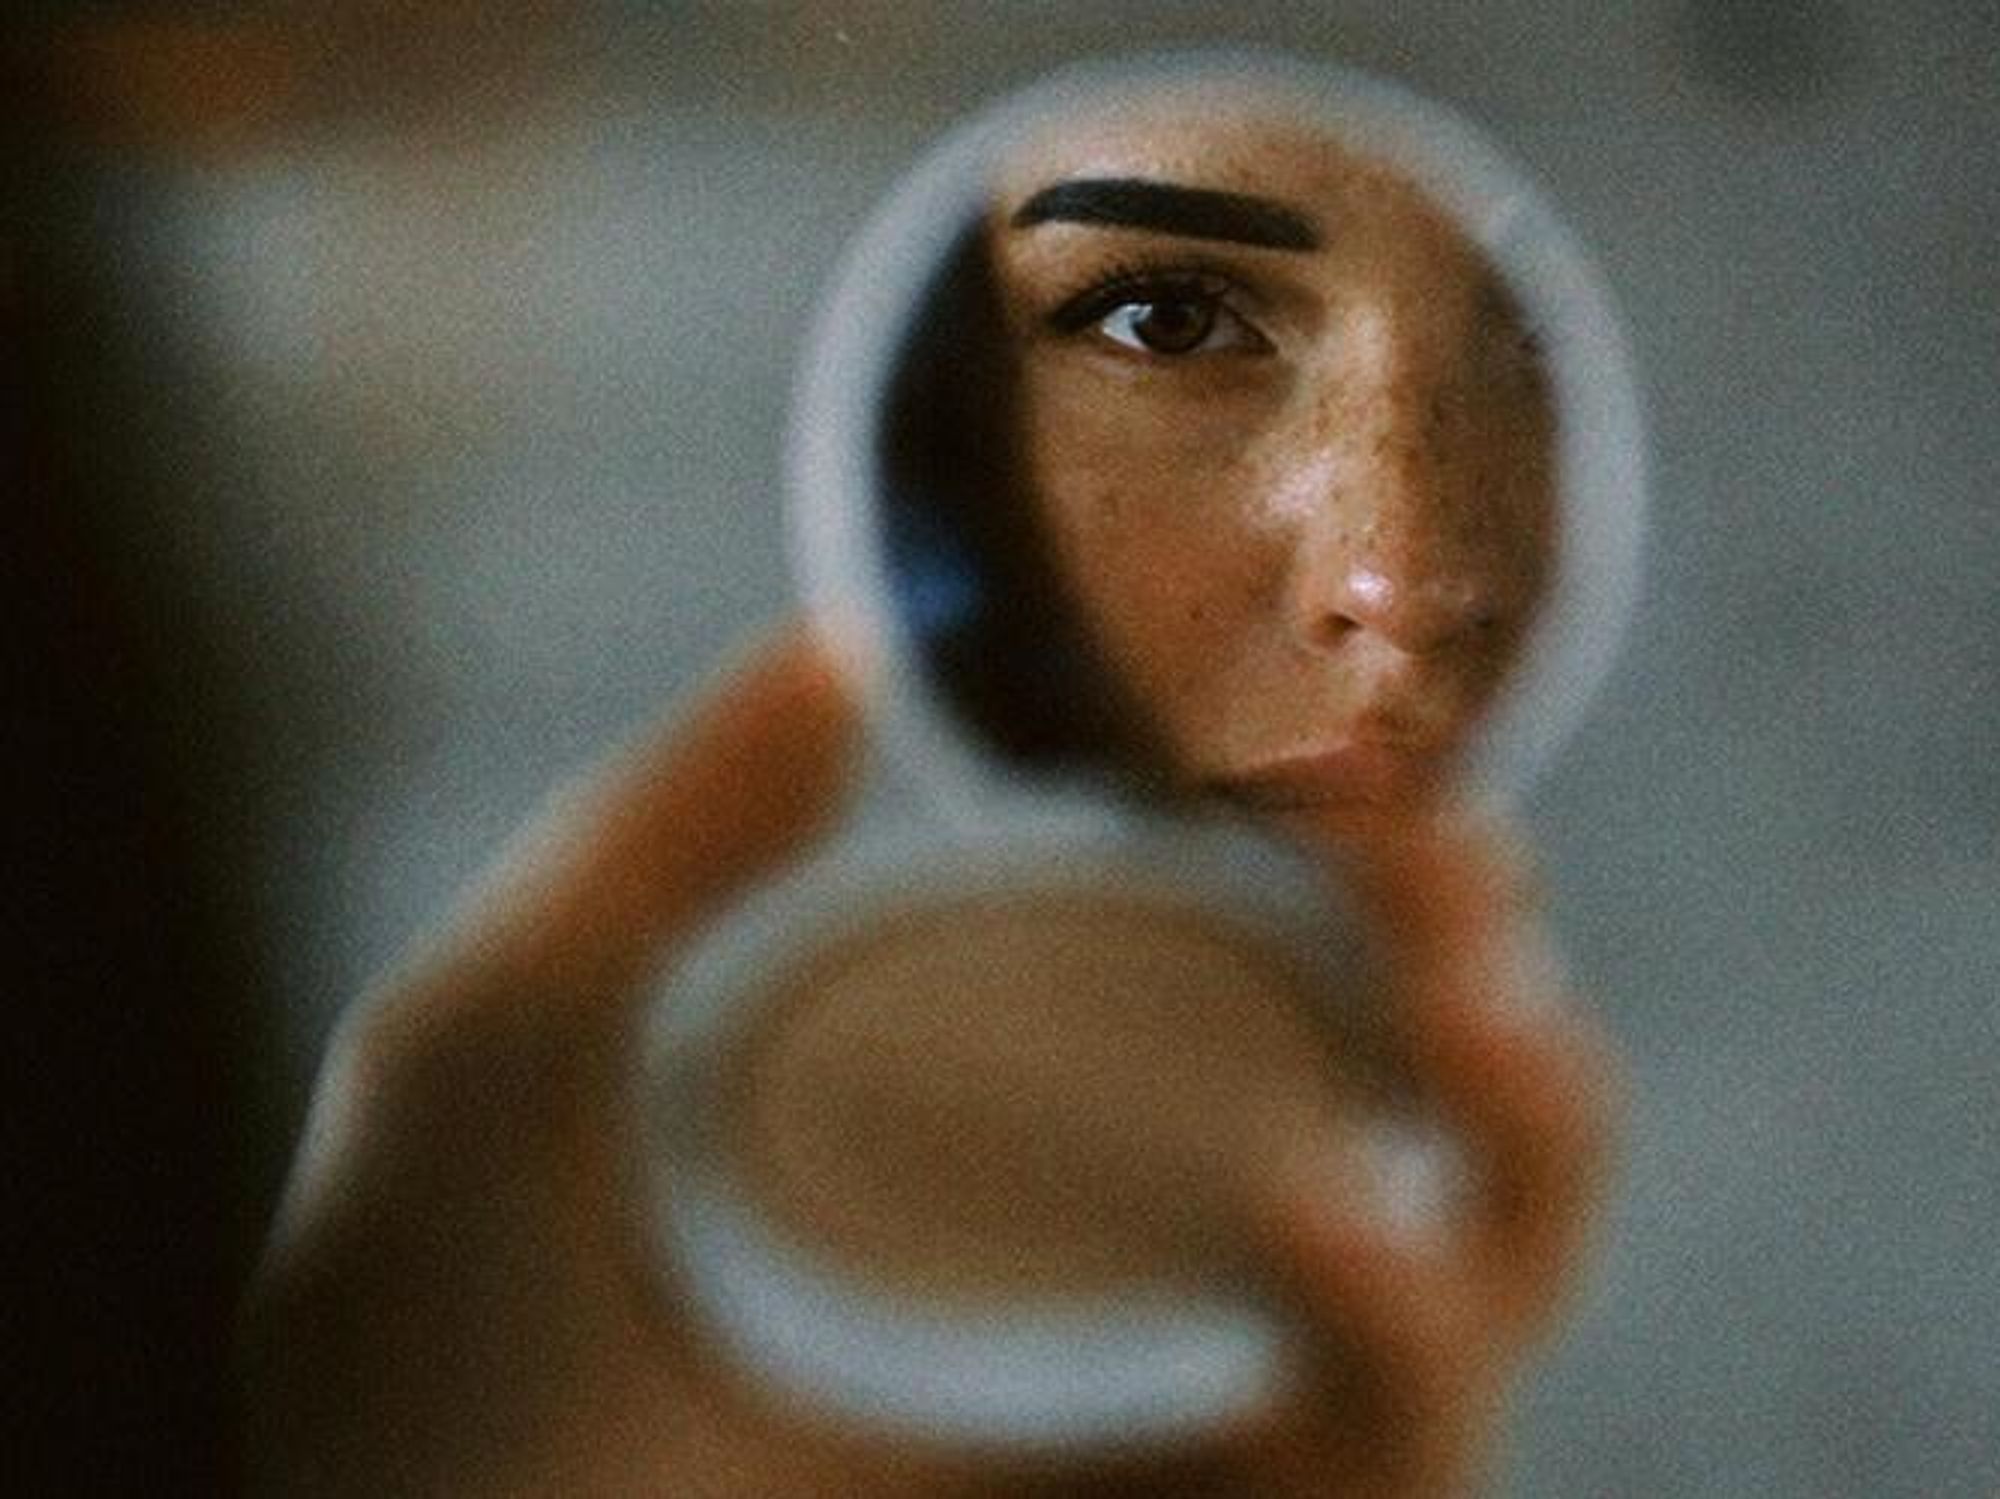 a woman looks at her reflection in a hand mirror